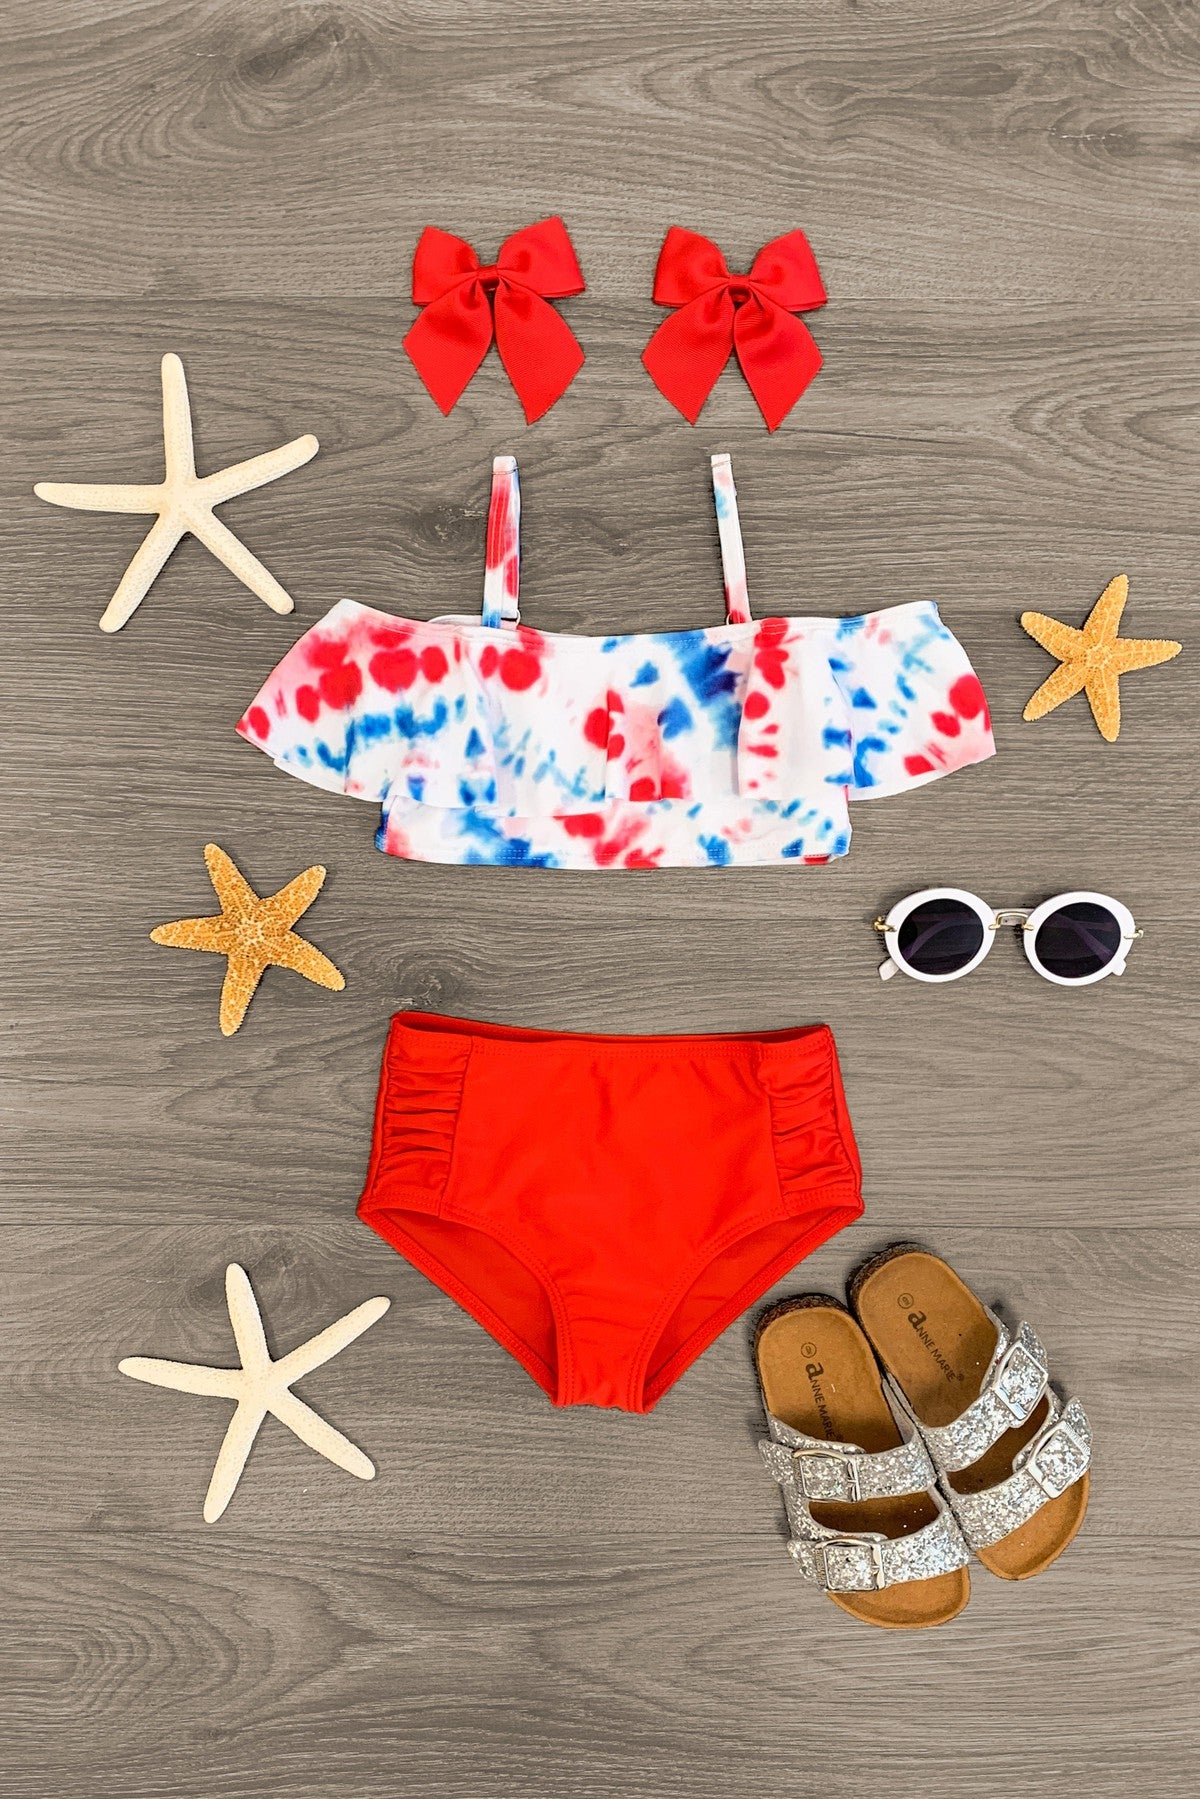 Red, White & Blue Tie Dye Swimsuit Set - Sparkle in Pink